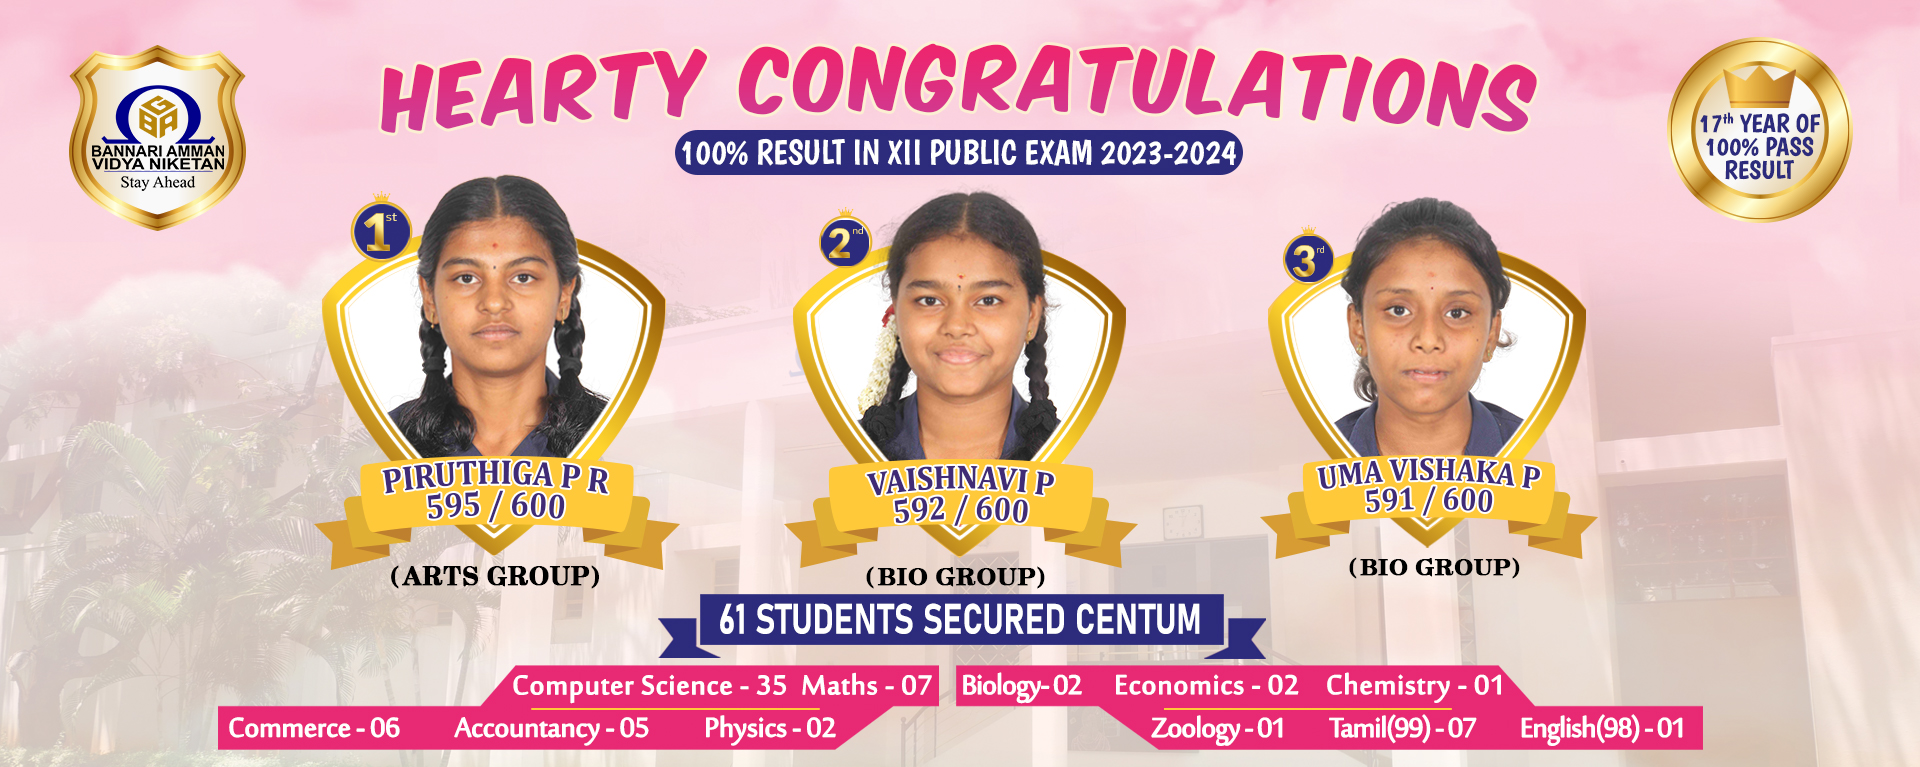 Celebrating Our School Toppers XII Public Examination 2023-2024 - State Second in Tamil Nadu